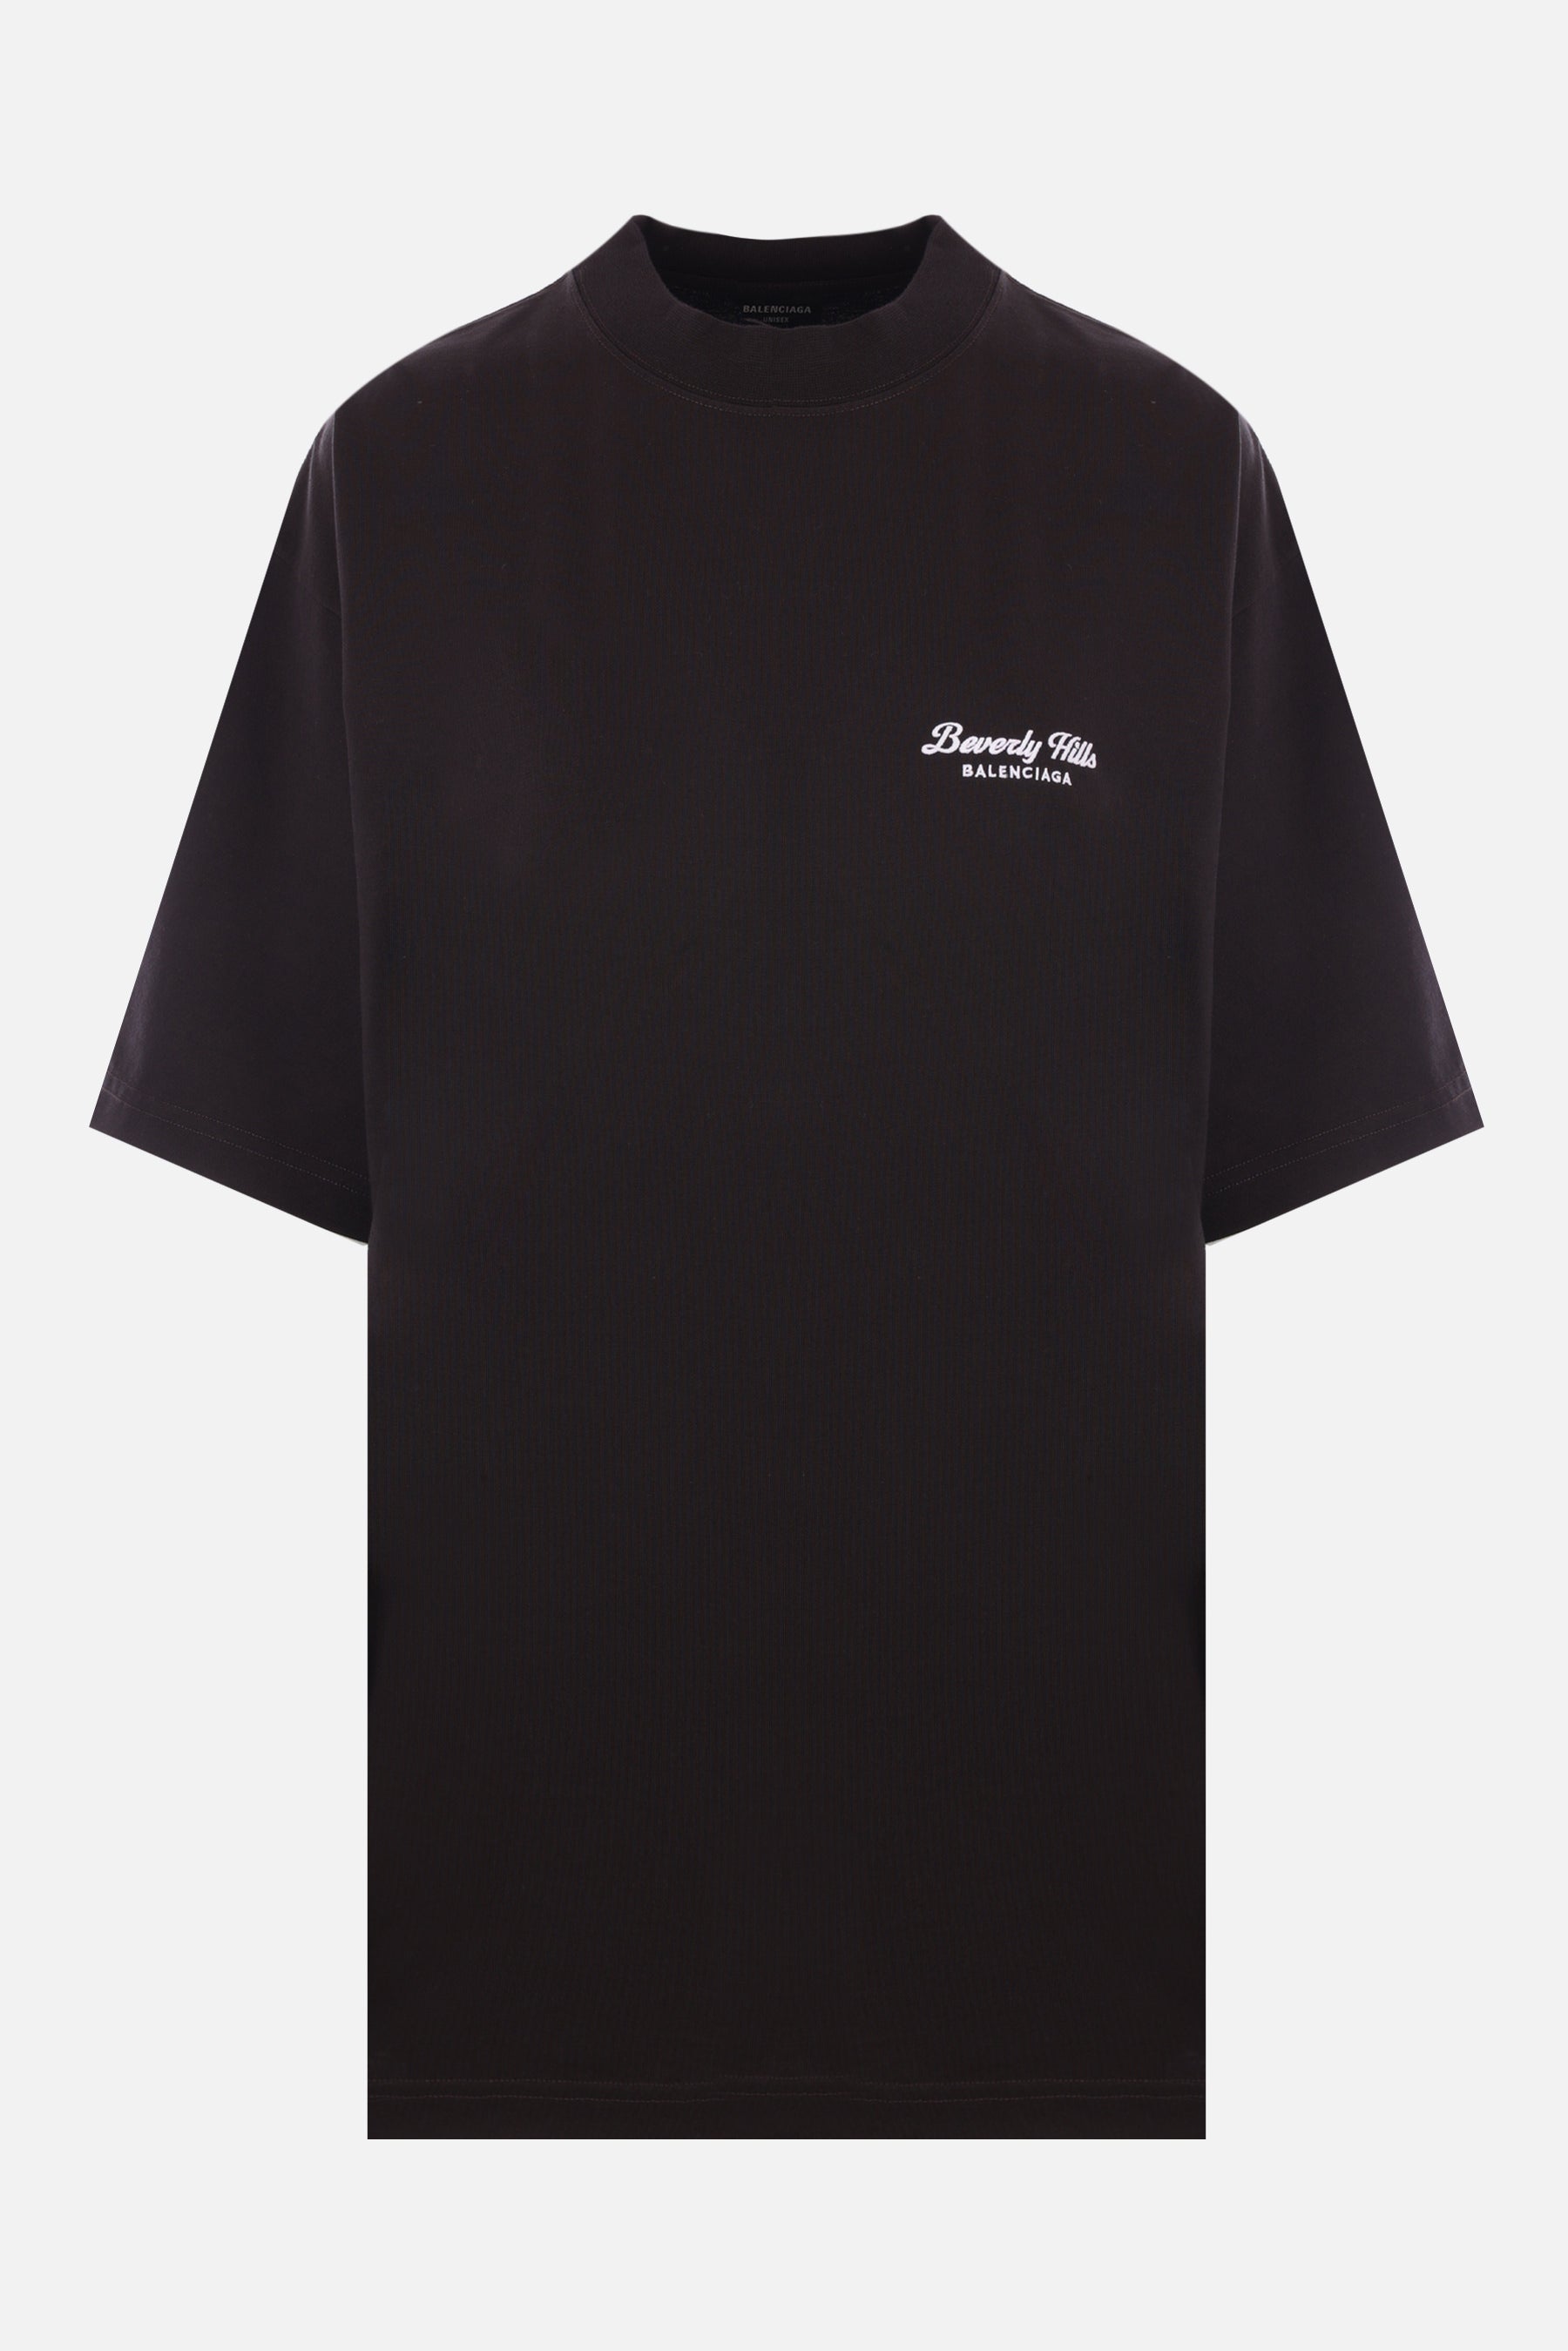 t-shirt Beverly Hills in cotone